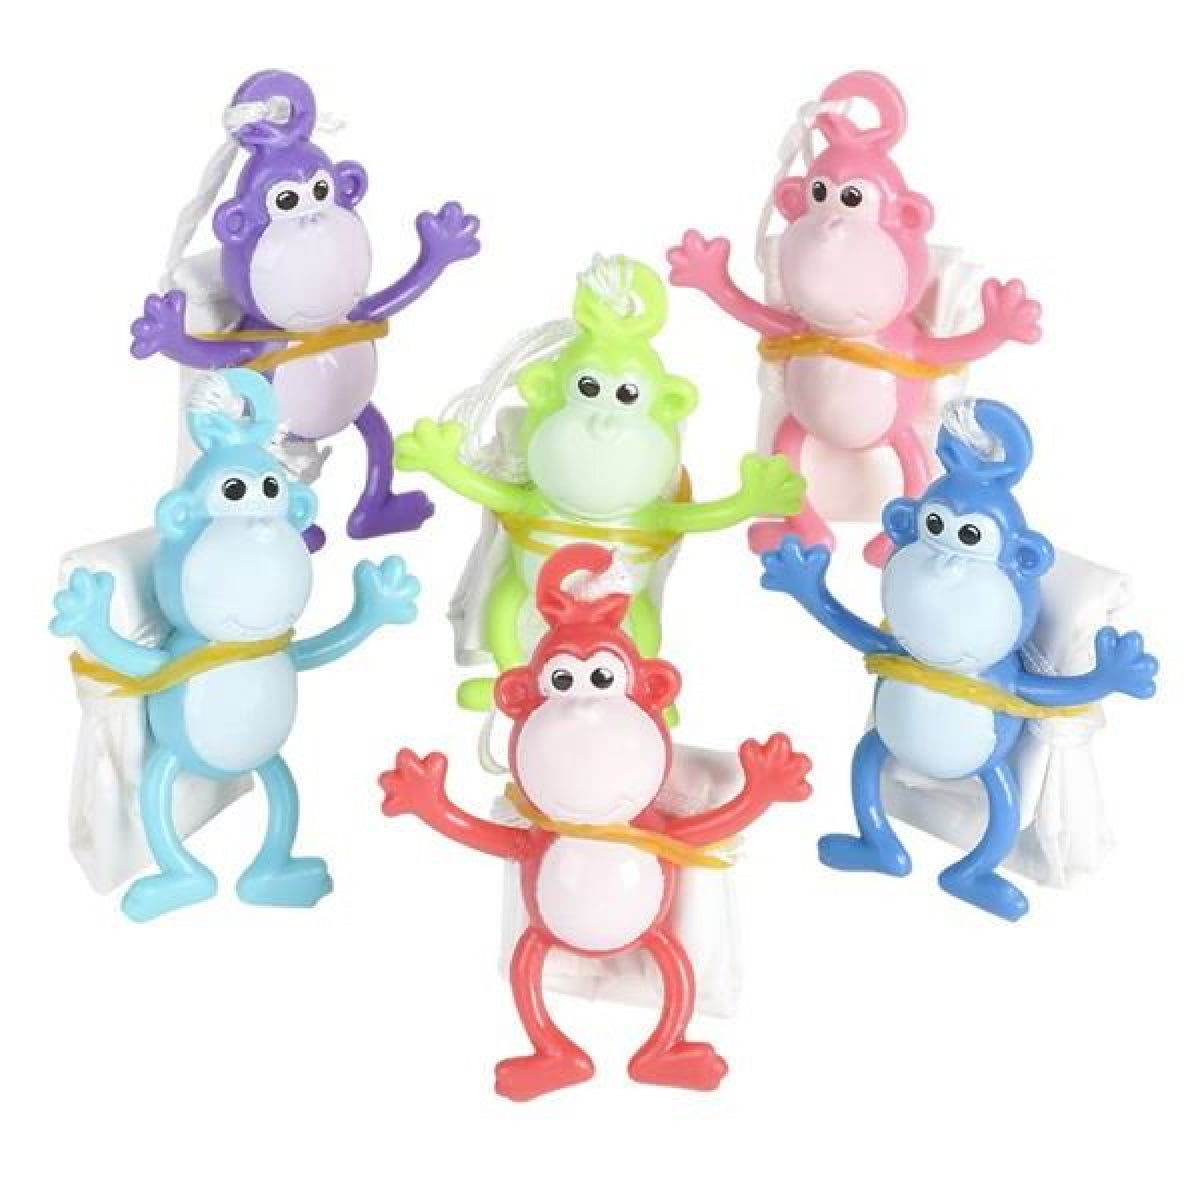 Monkey Shaped Paratroopers with Parachutes Kids Toys In Bulk- Assorted